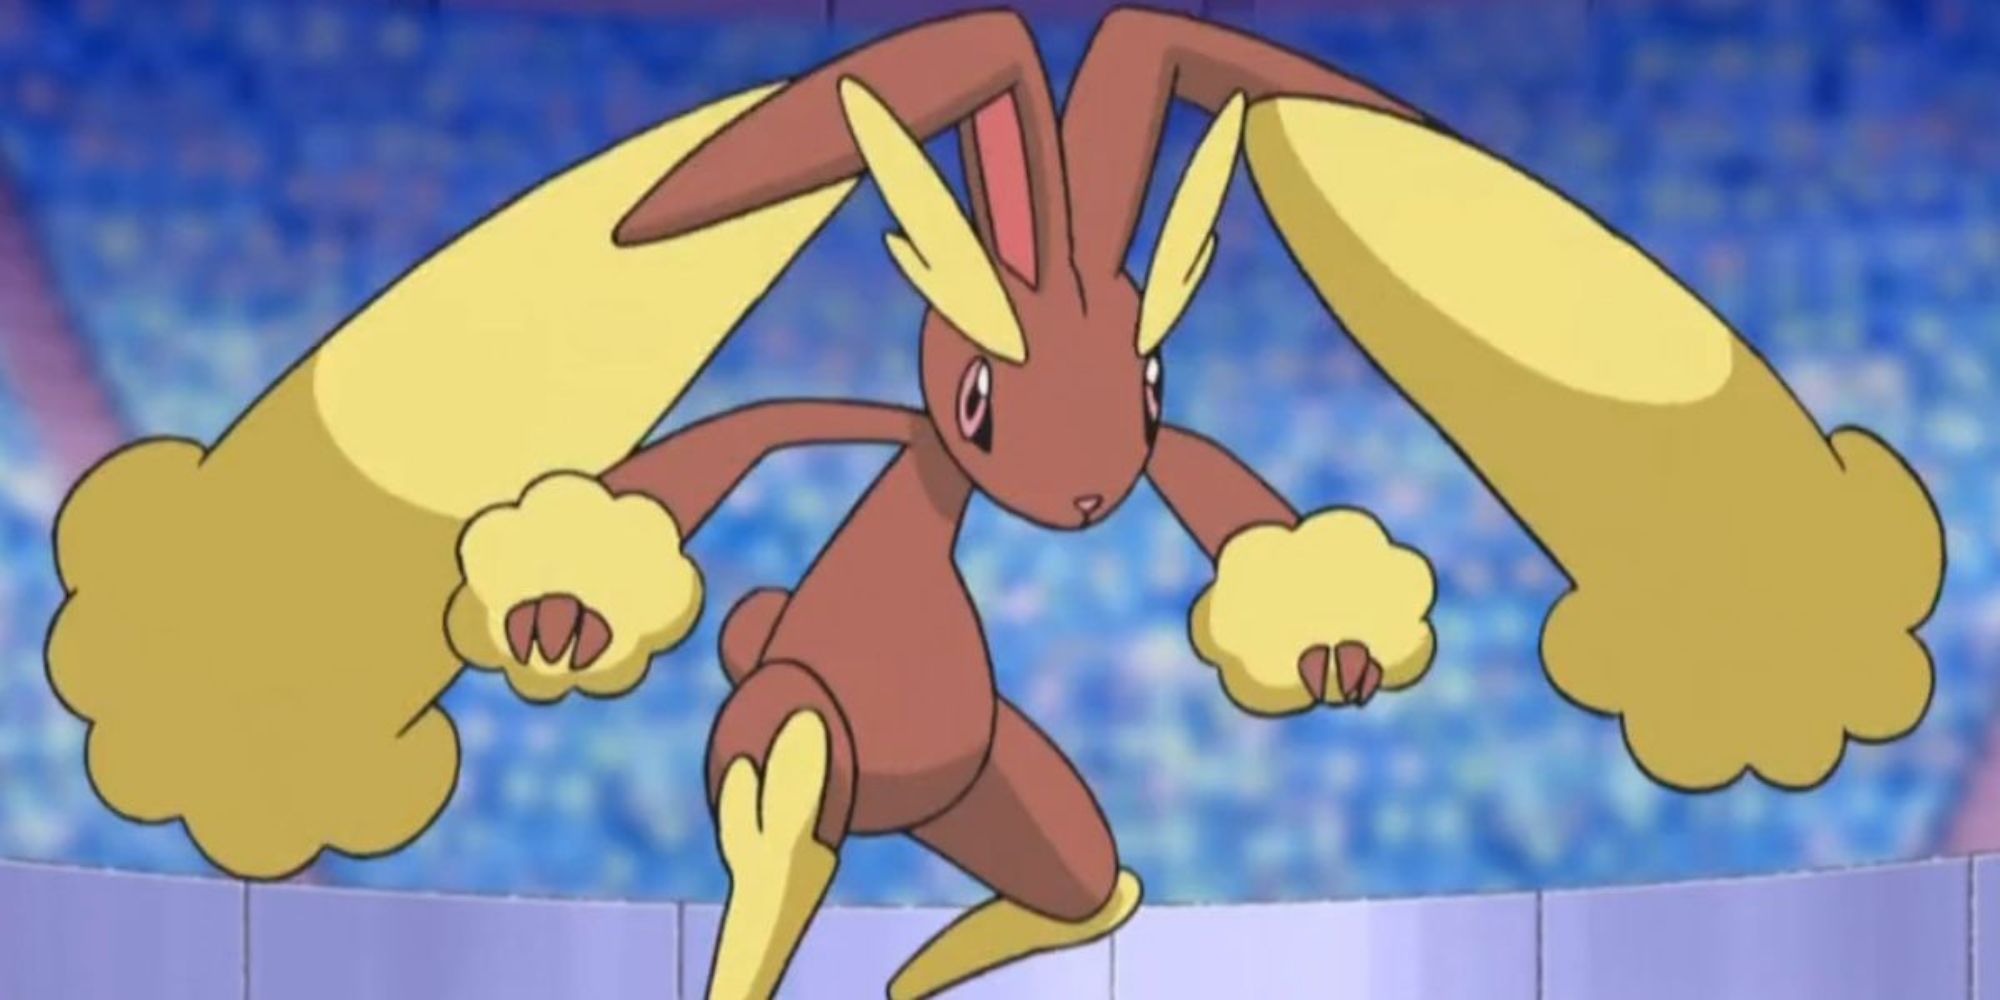 Lopunny jumps in the air in a crowded stadium